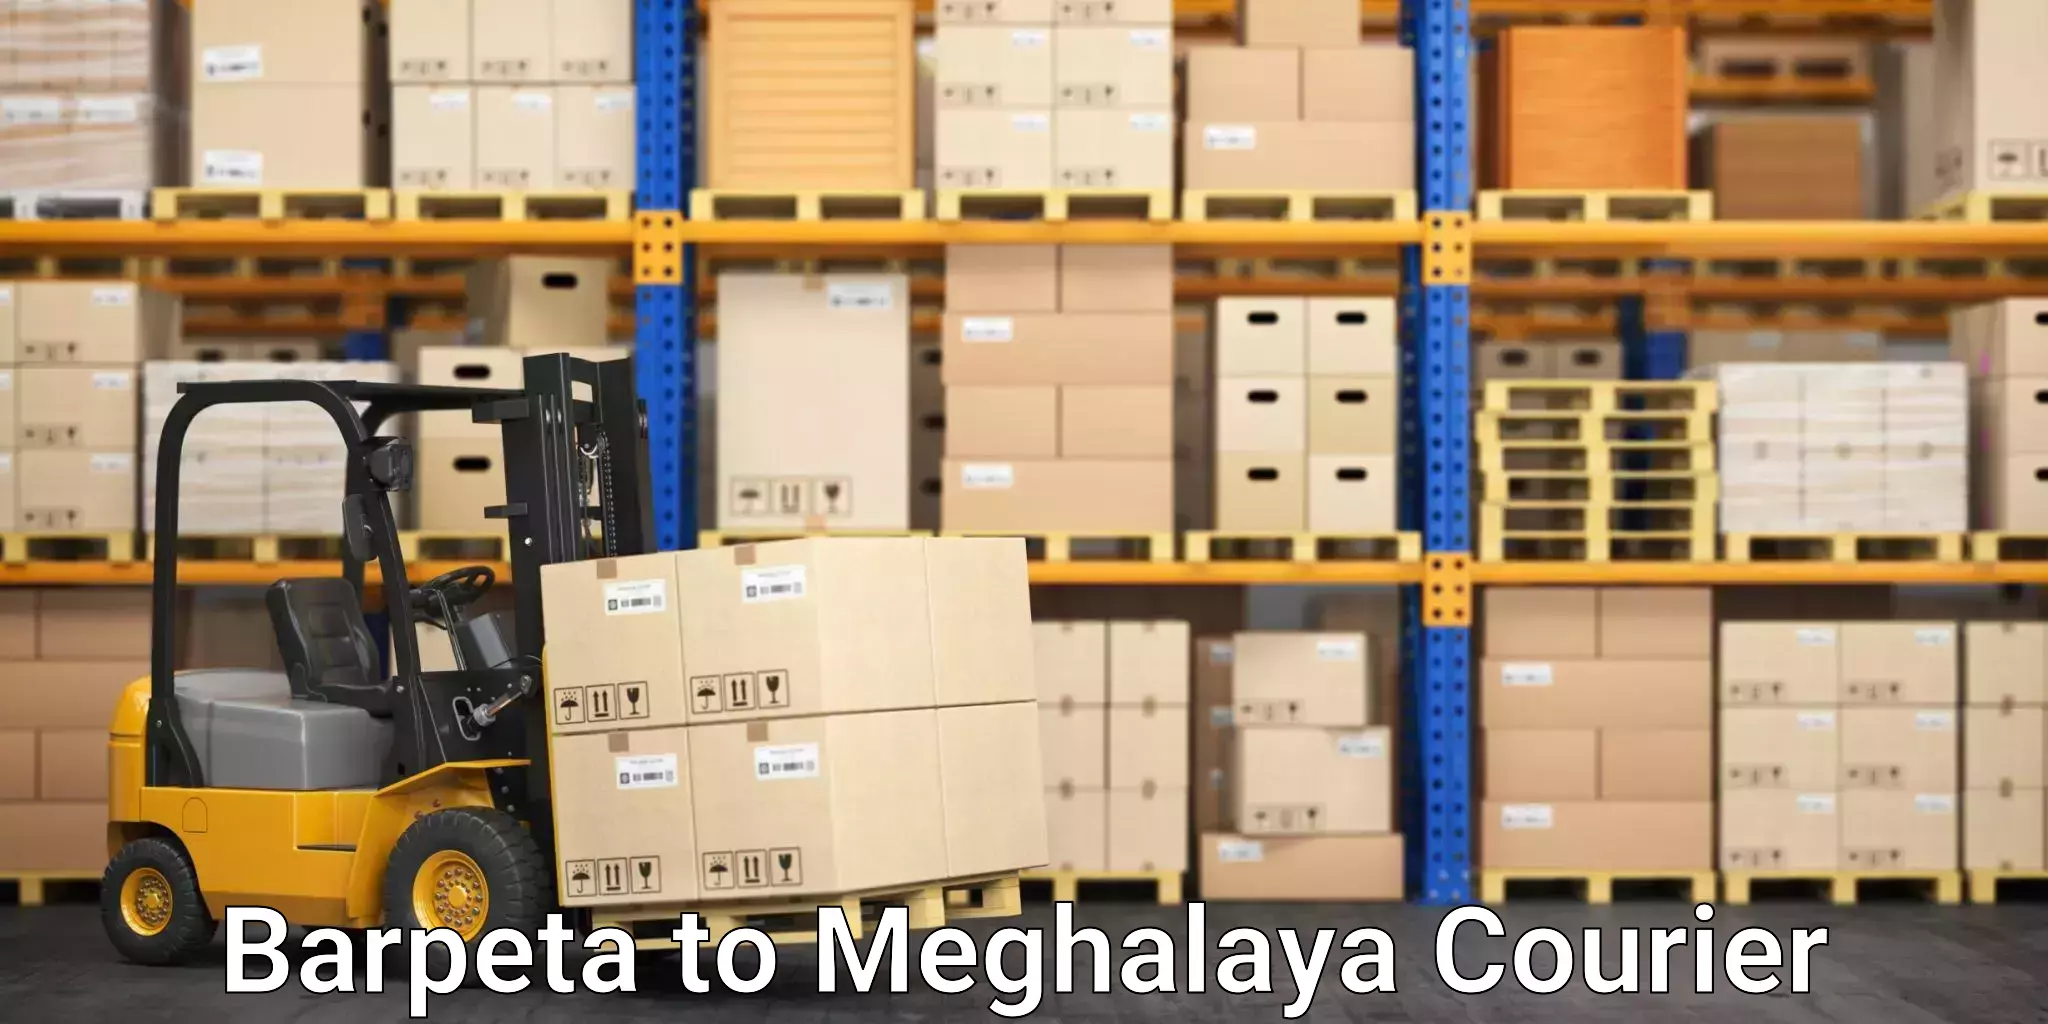 Reliable freight solutions Barpeta to Meghalaya